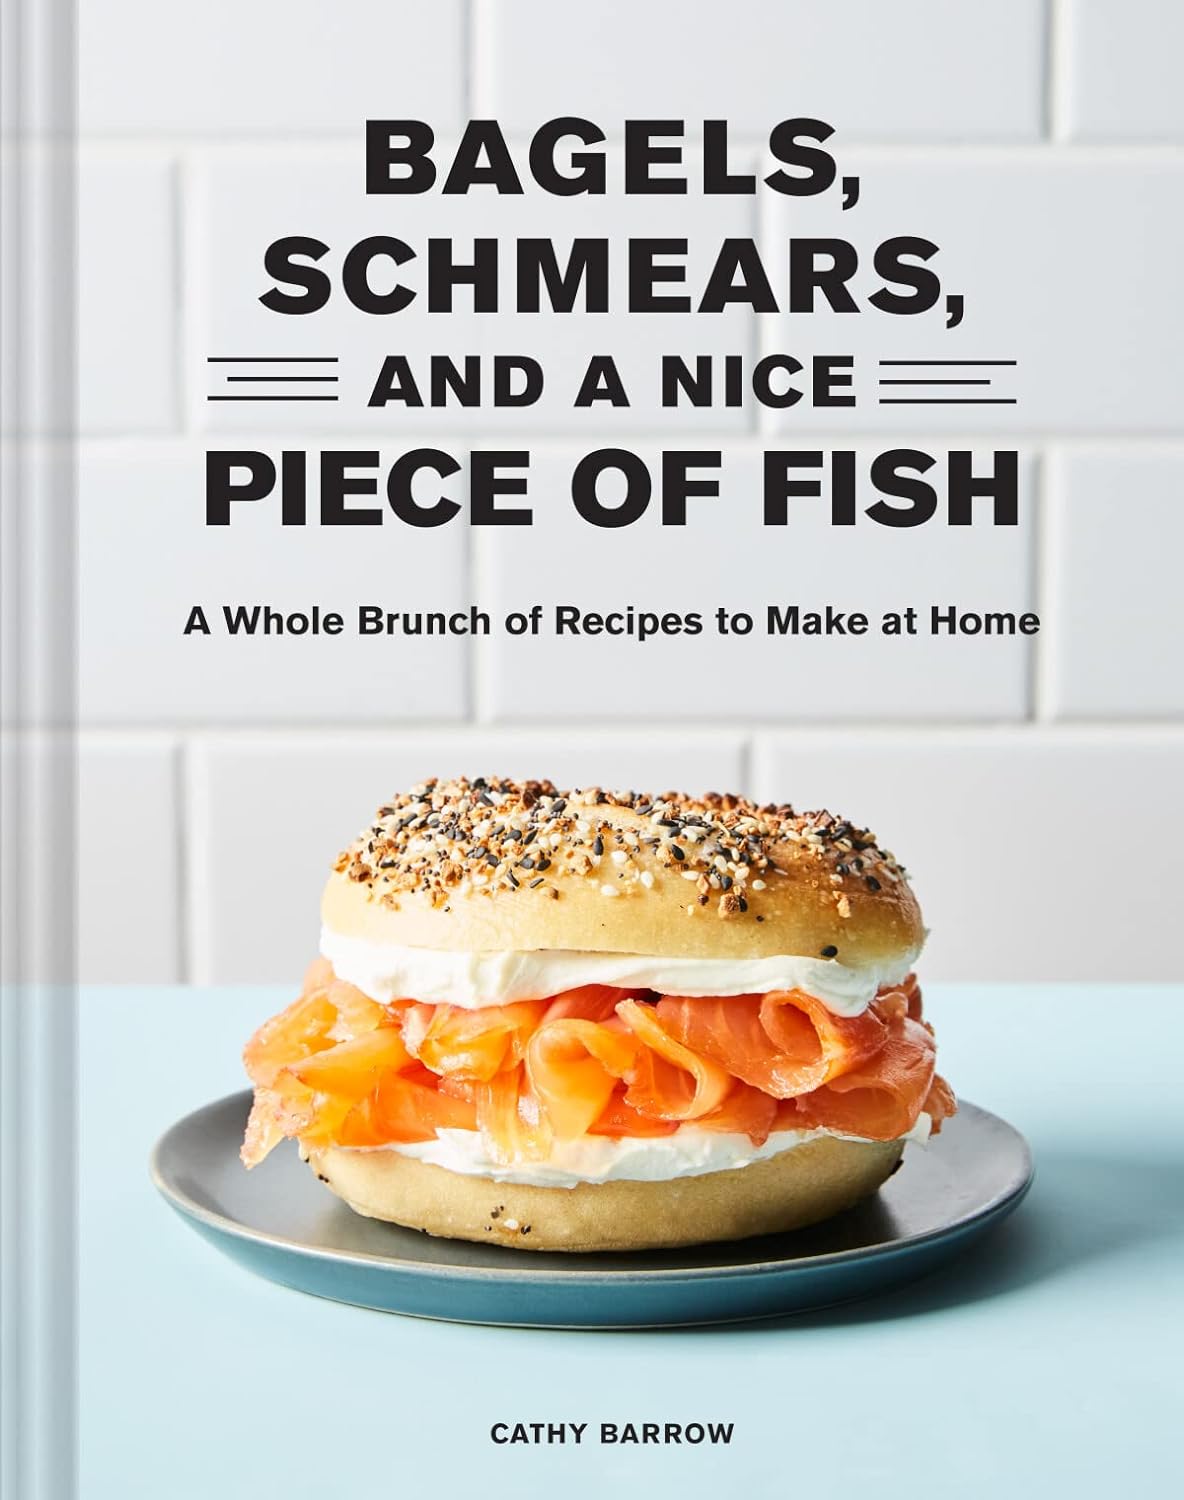 BAGELS, SCHMEARS AND A NICE PIECE OF FISH